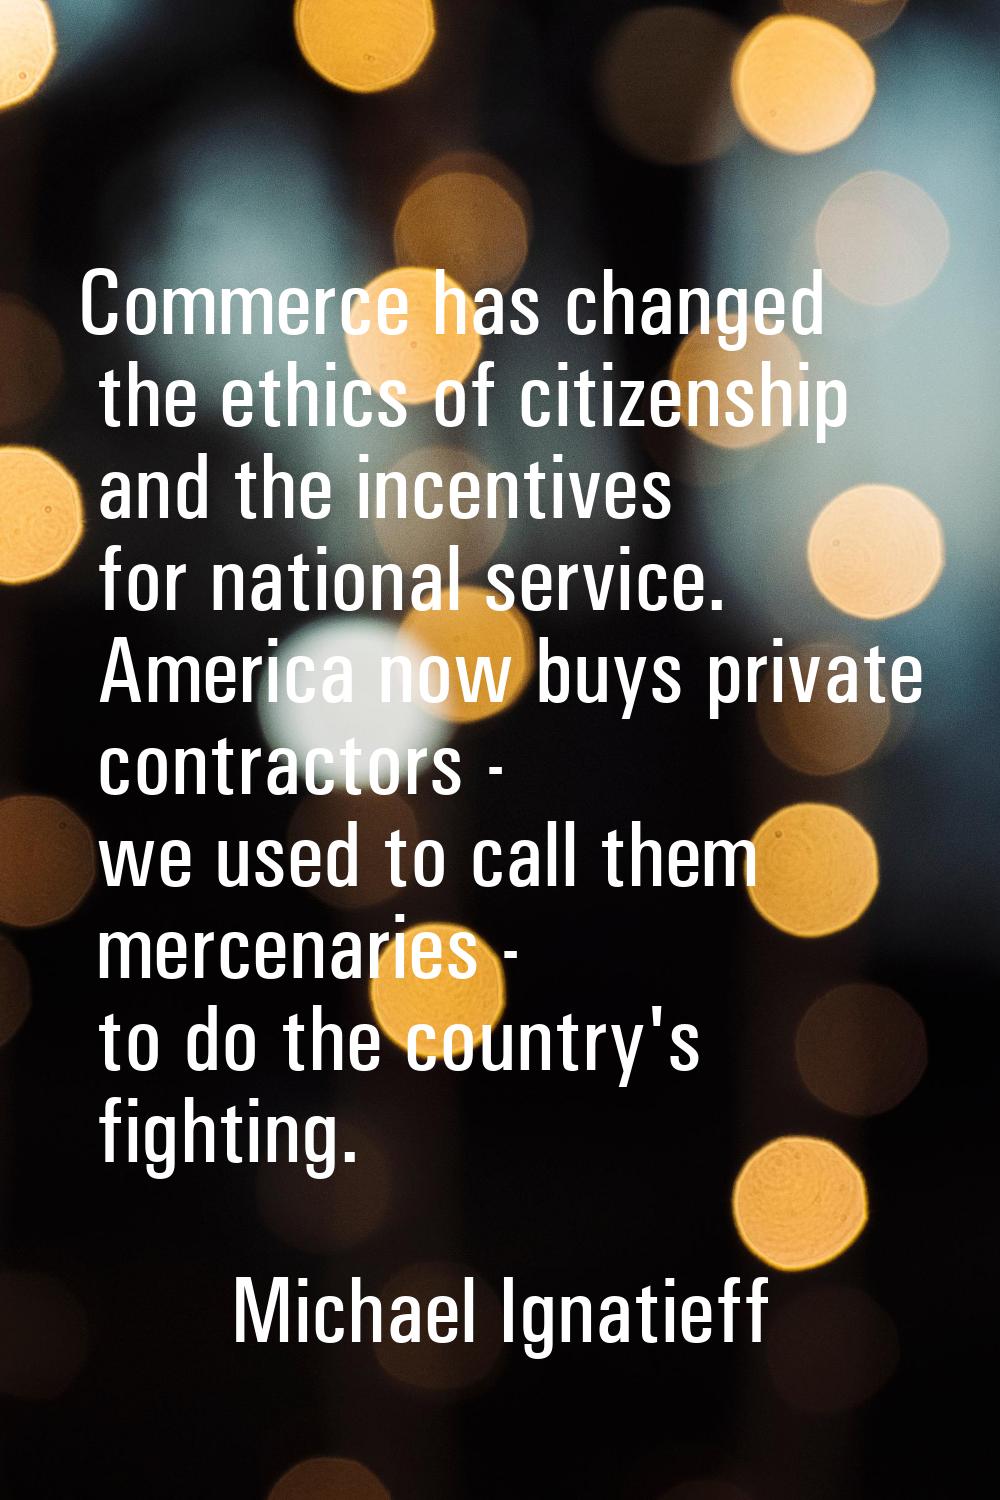 Commerce has changed the ethics of citizenship and the incentives for national service. America now